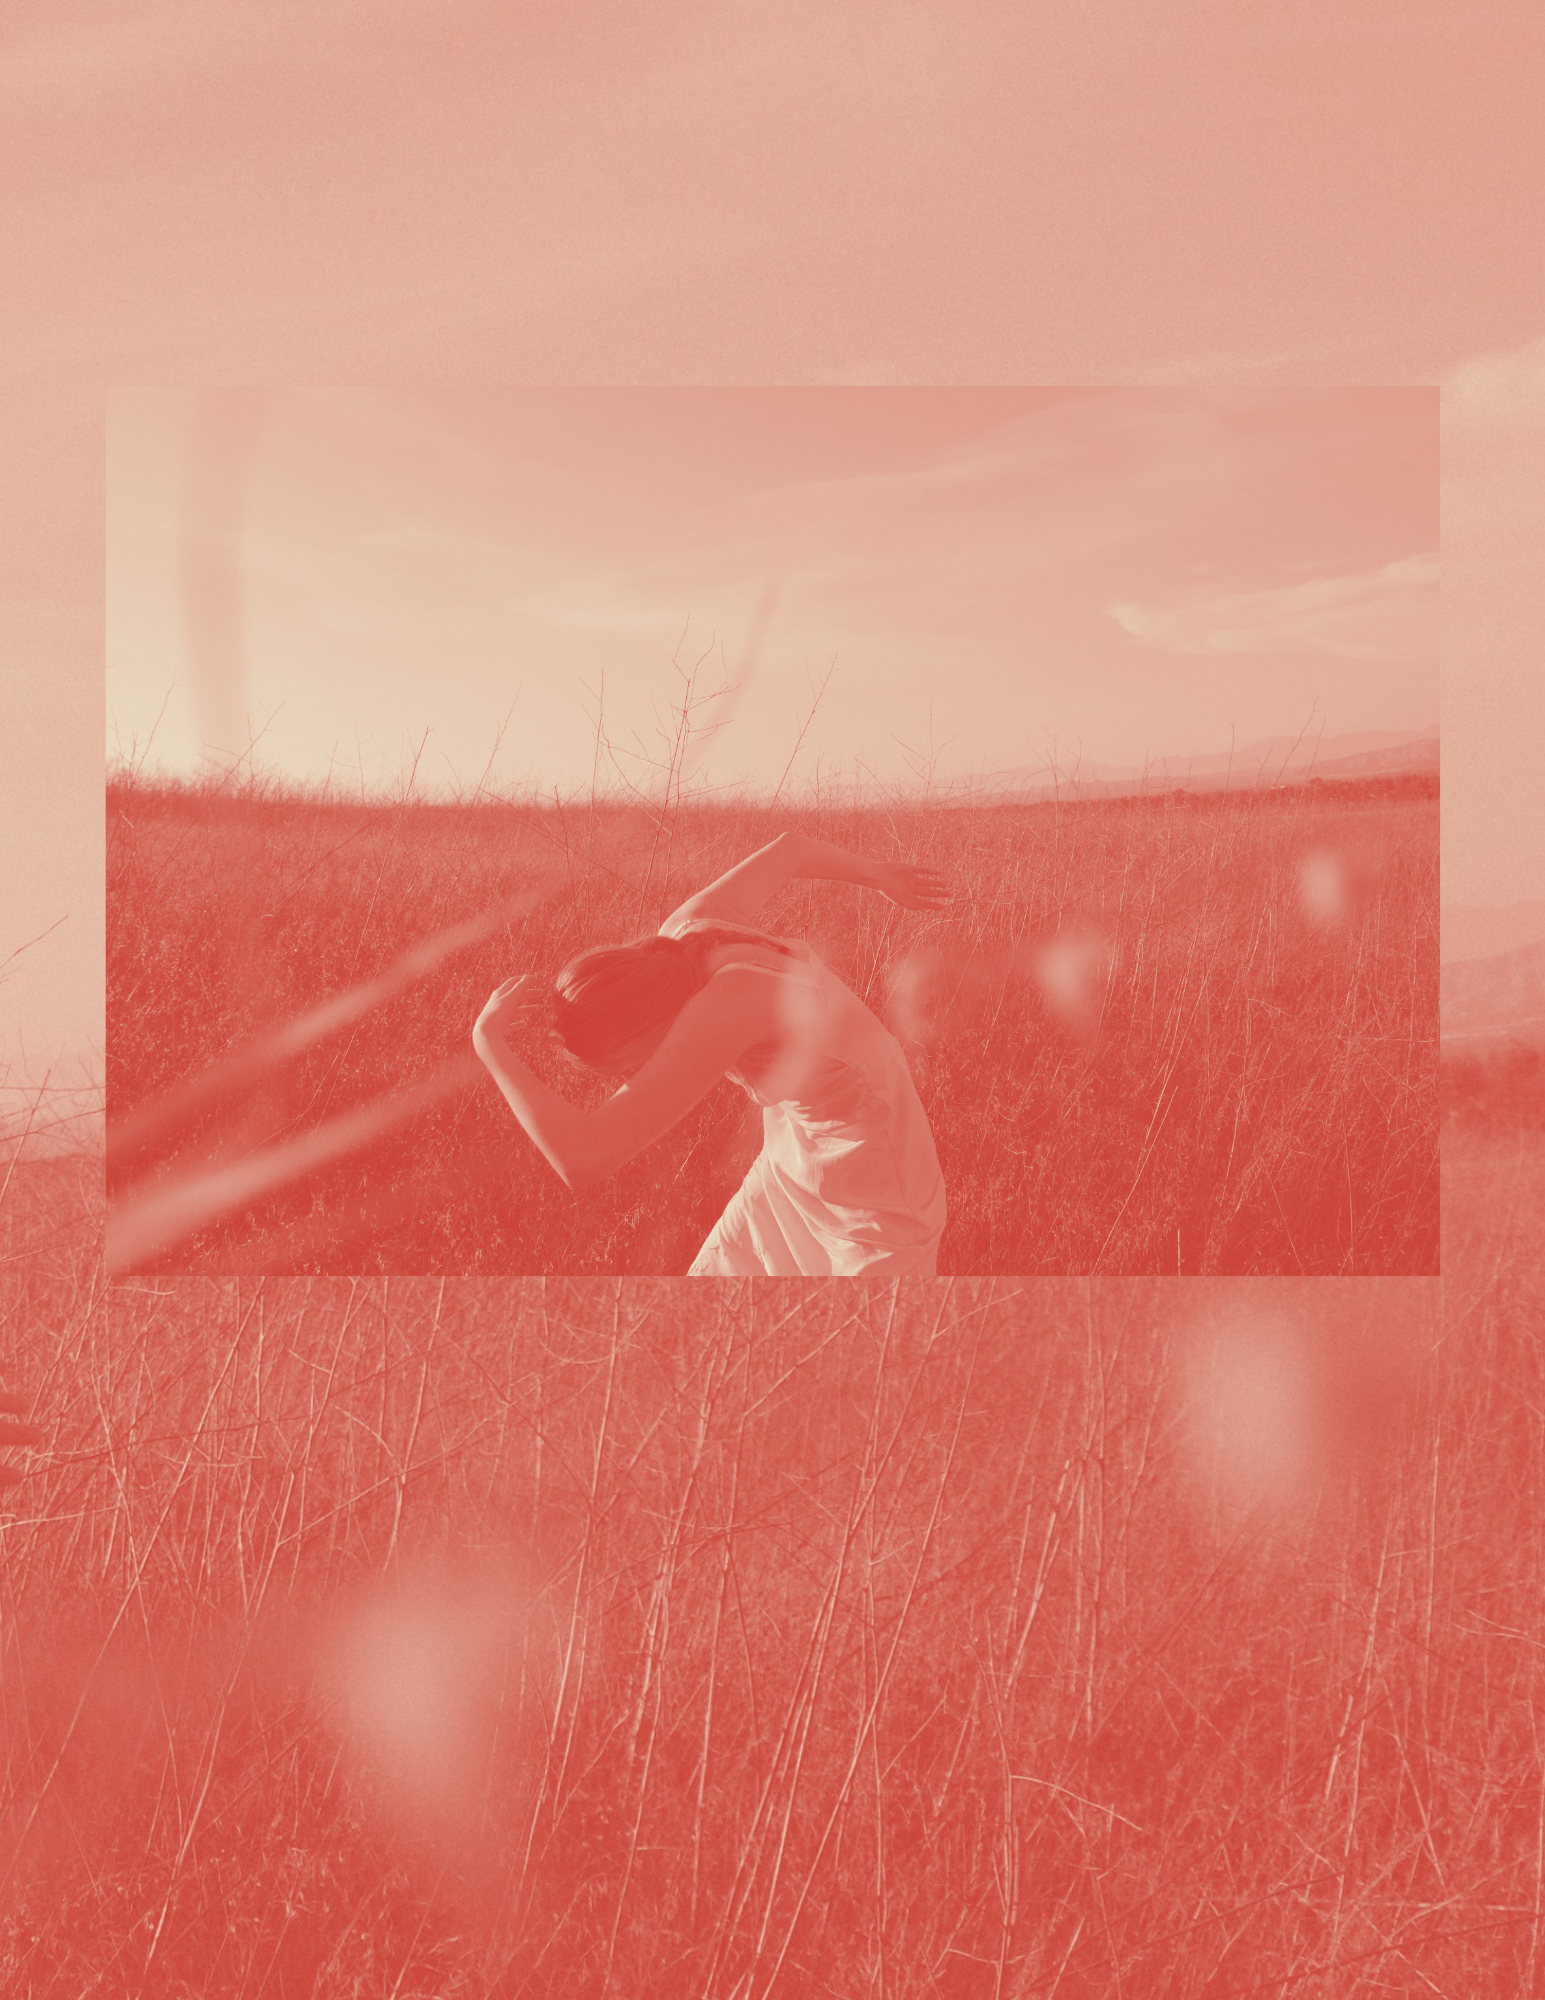 Dancer curving body forwards with arms reaching by their face in a field with red tint over the picture